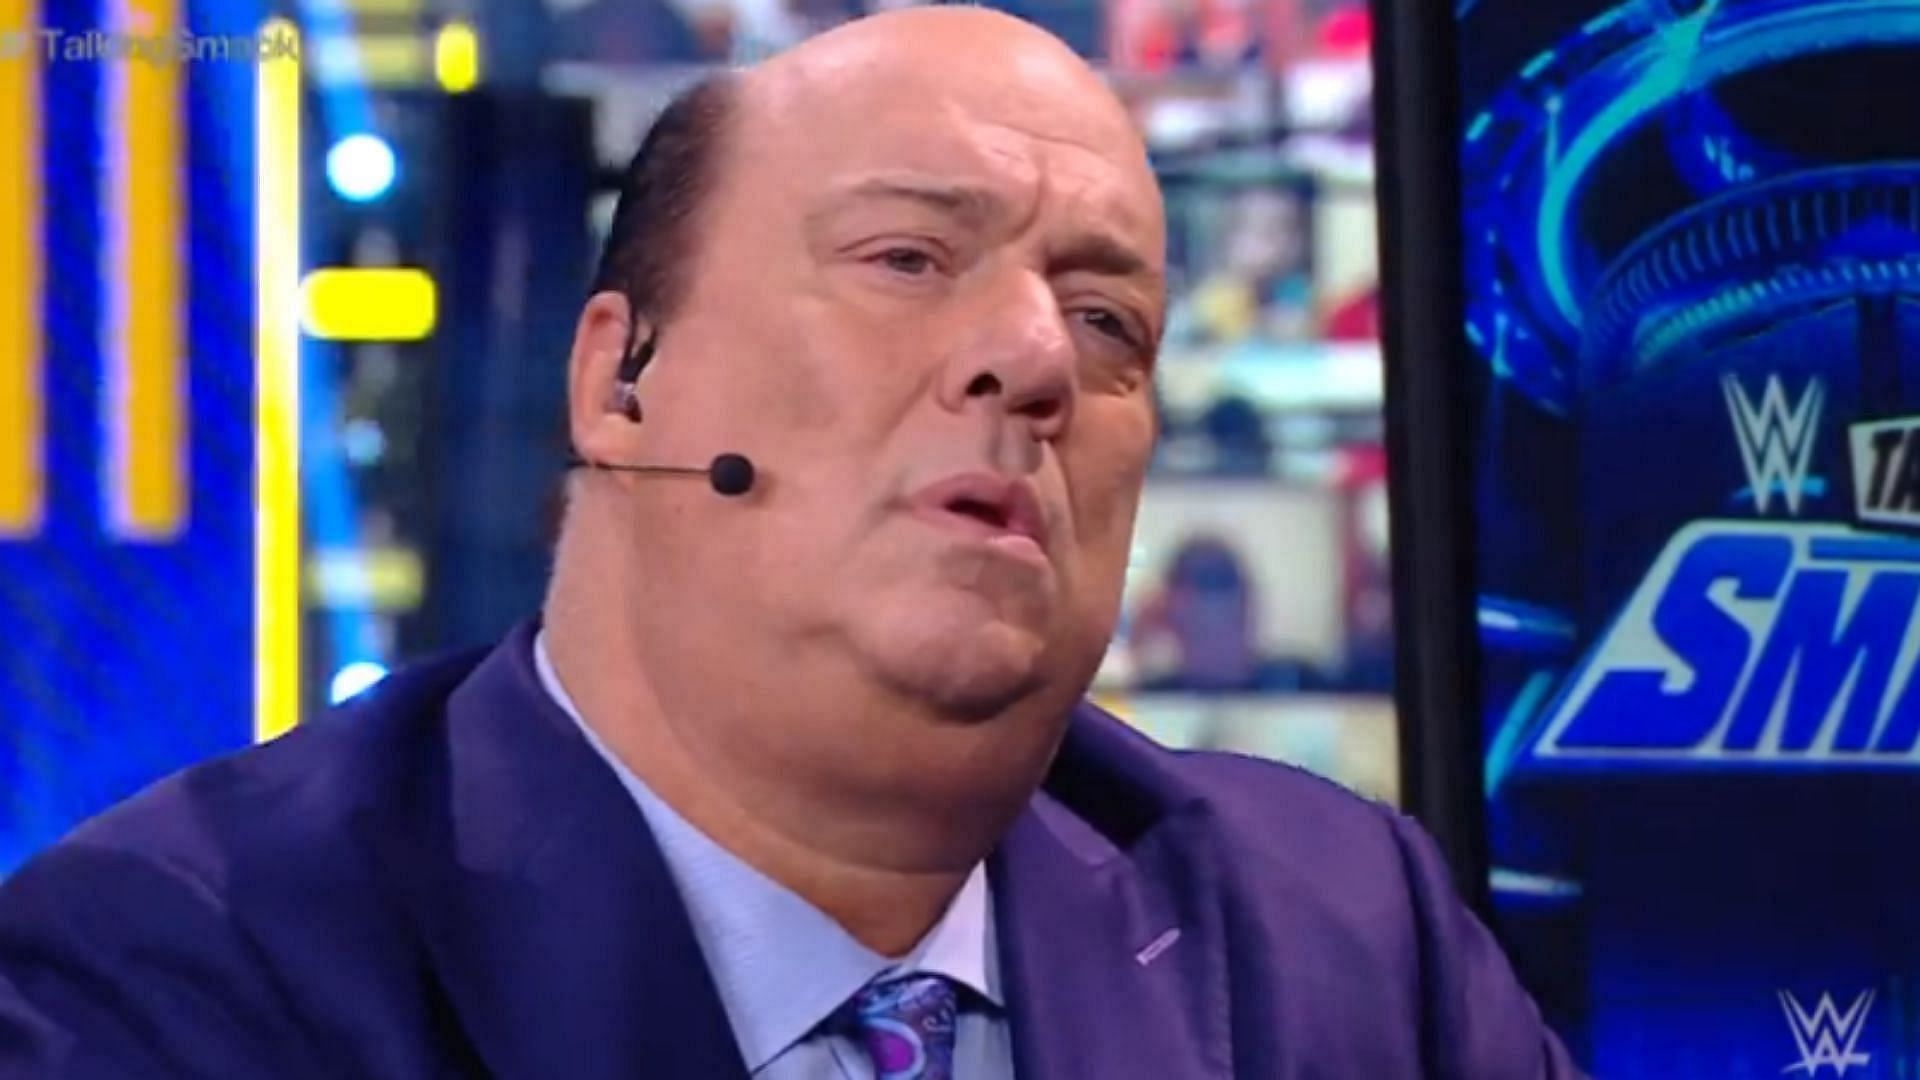 Paul Heyman currently performs as Roman Reigns